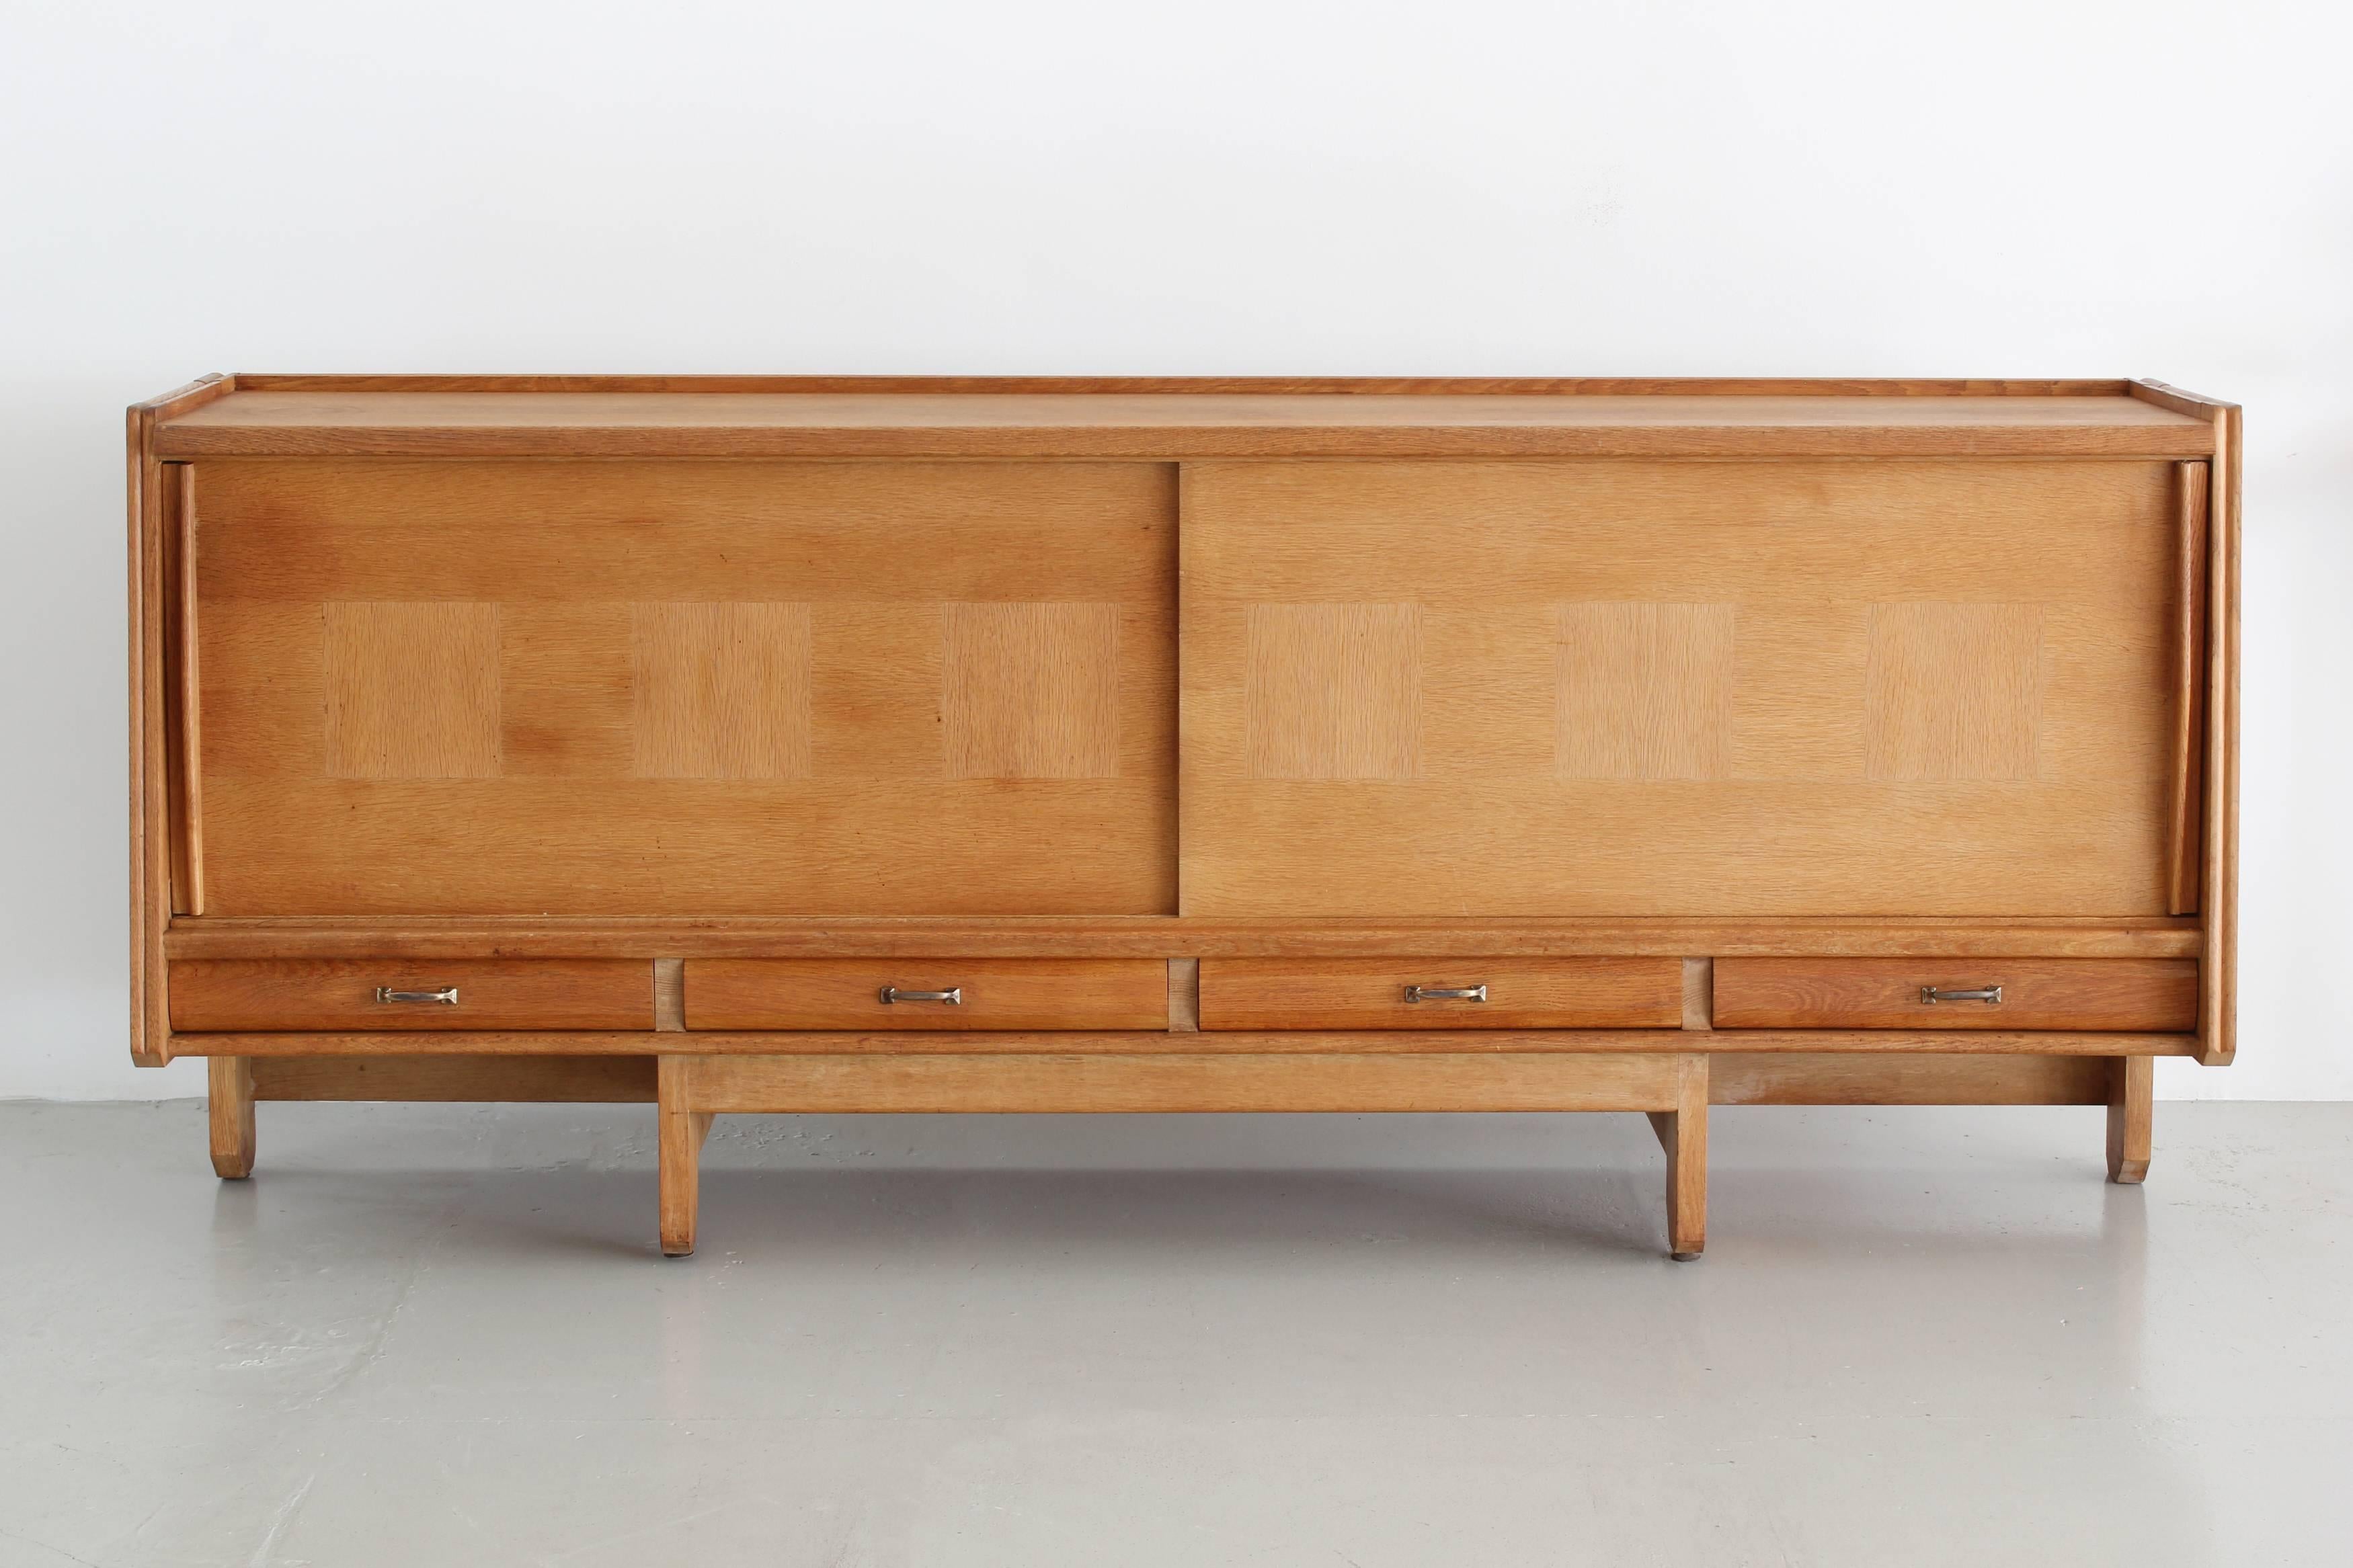 Large sliding door buffet by Robert Guillerme (1913-1990) and Jacques Chambron (1914-2001) with four low pull-out drawers, circa 1950.

Front doors have repeating cross-grain square decoration.